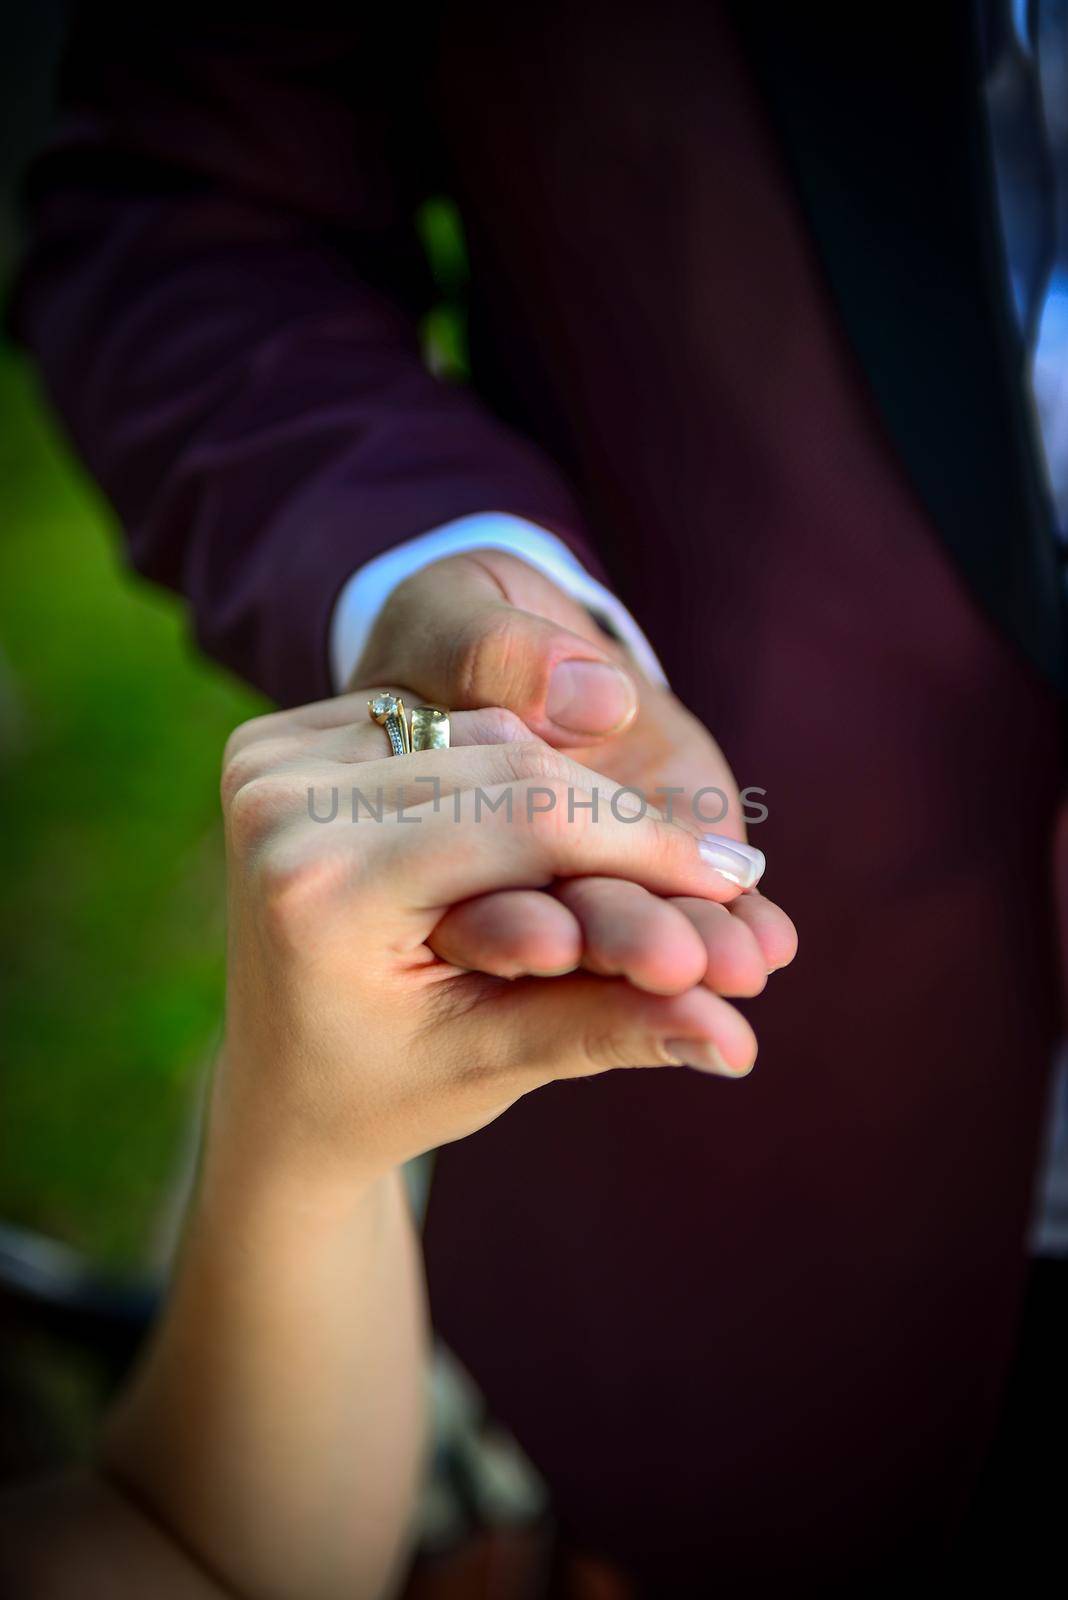 Bride and groom holding hands with engagement rings on their fingers close up view wedding shoot concept by tasci